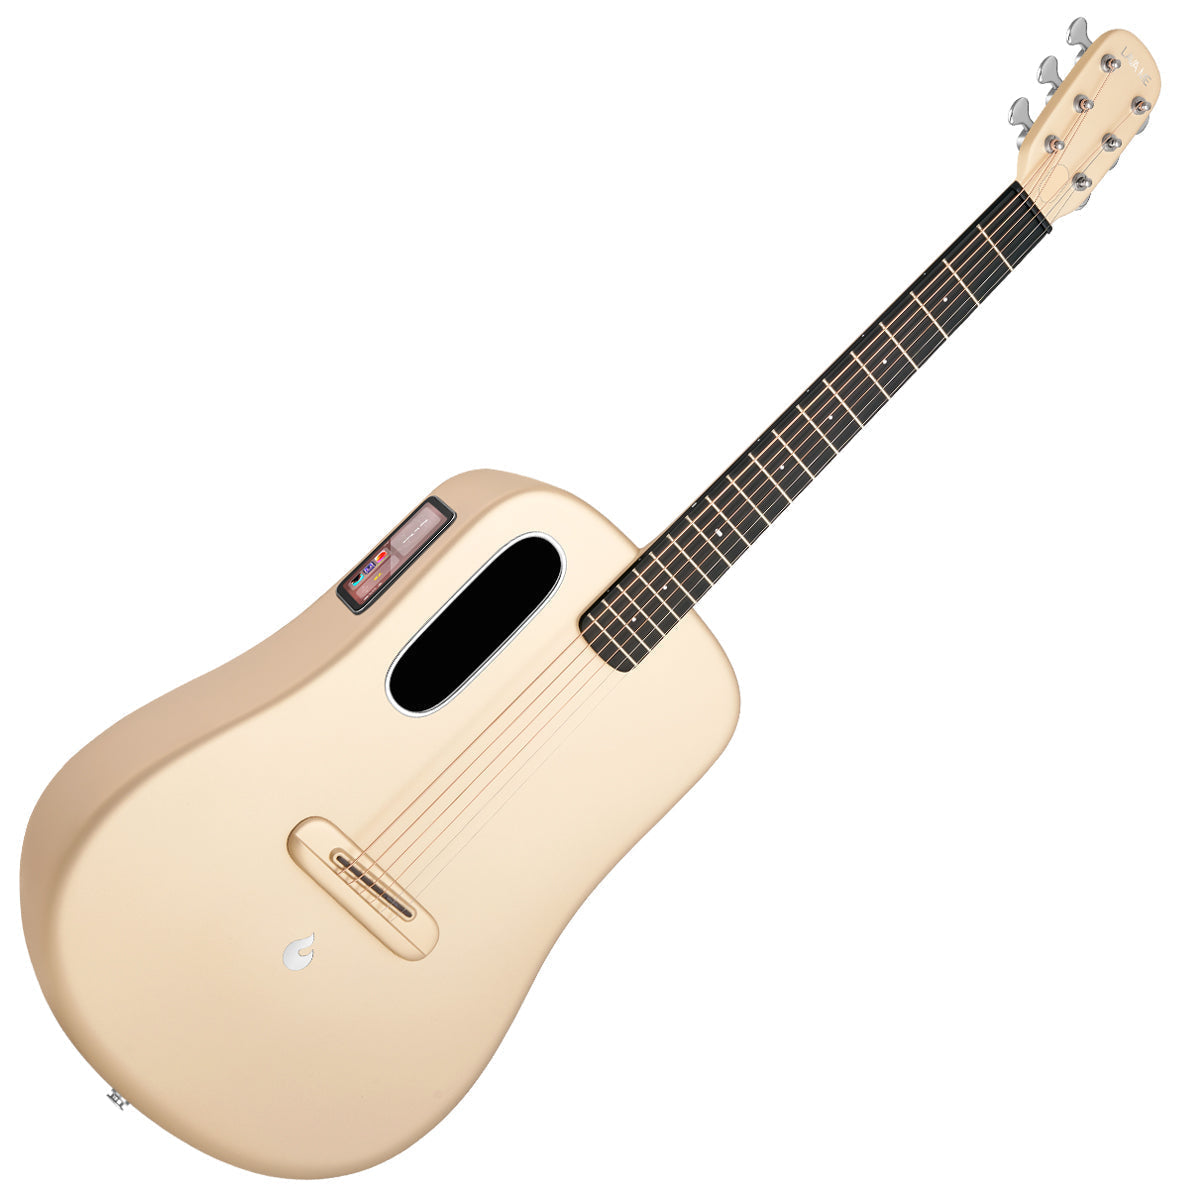 LAVA ME4 Carbon 36" with Space Bag ~ Soft Gold, Acoustic Guitar for sale at Richards Guitars.